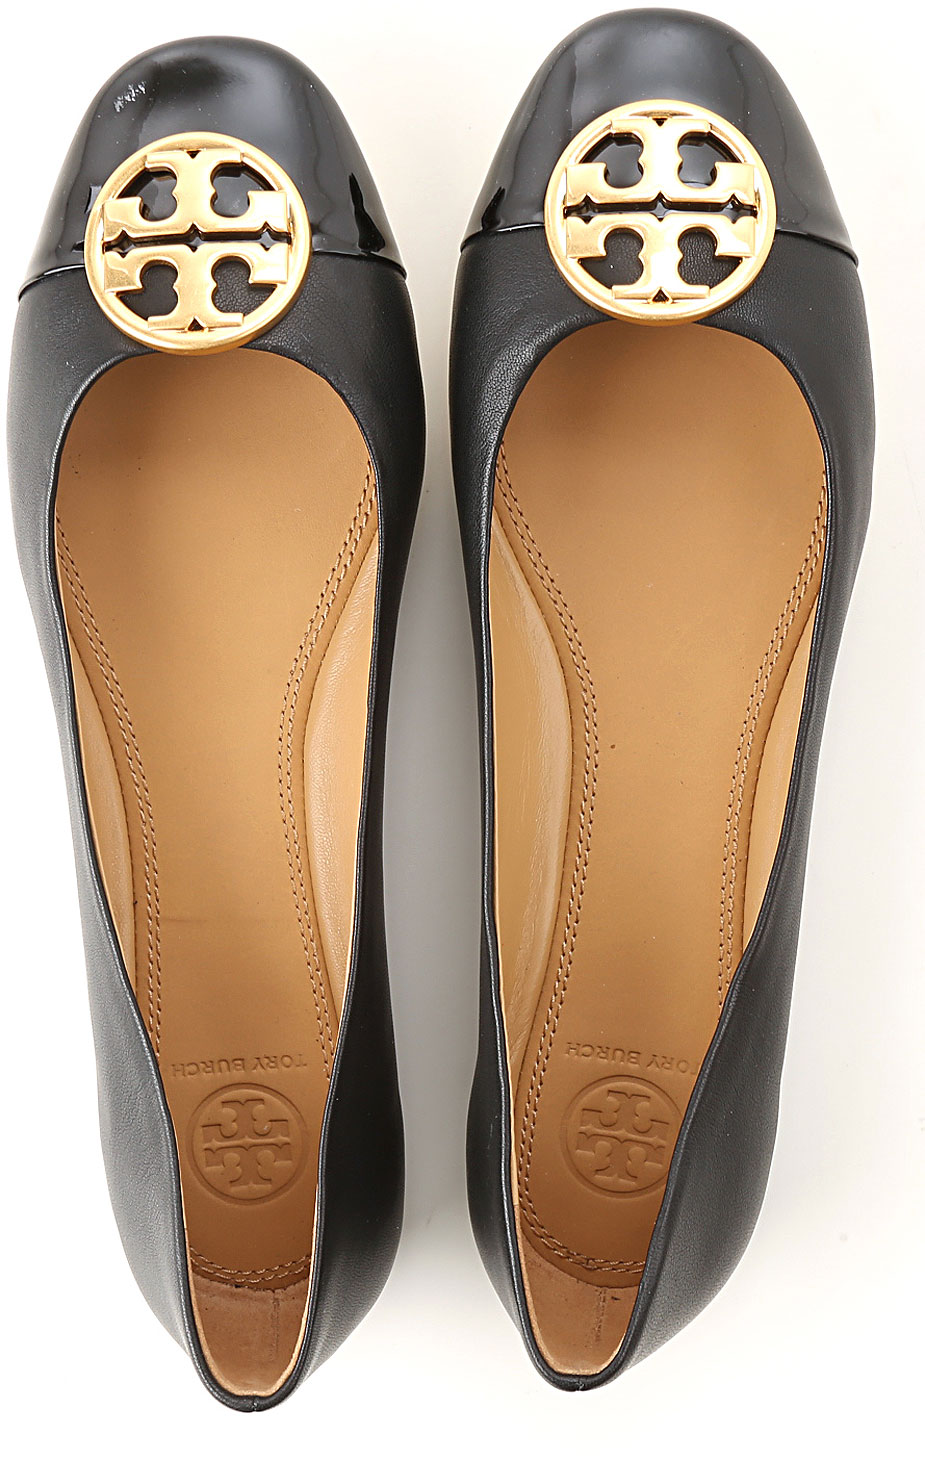 Womens Shoes Tory Burch, Style code: 46882-009-